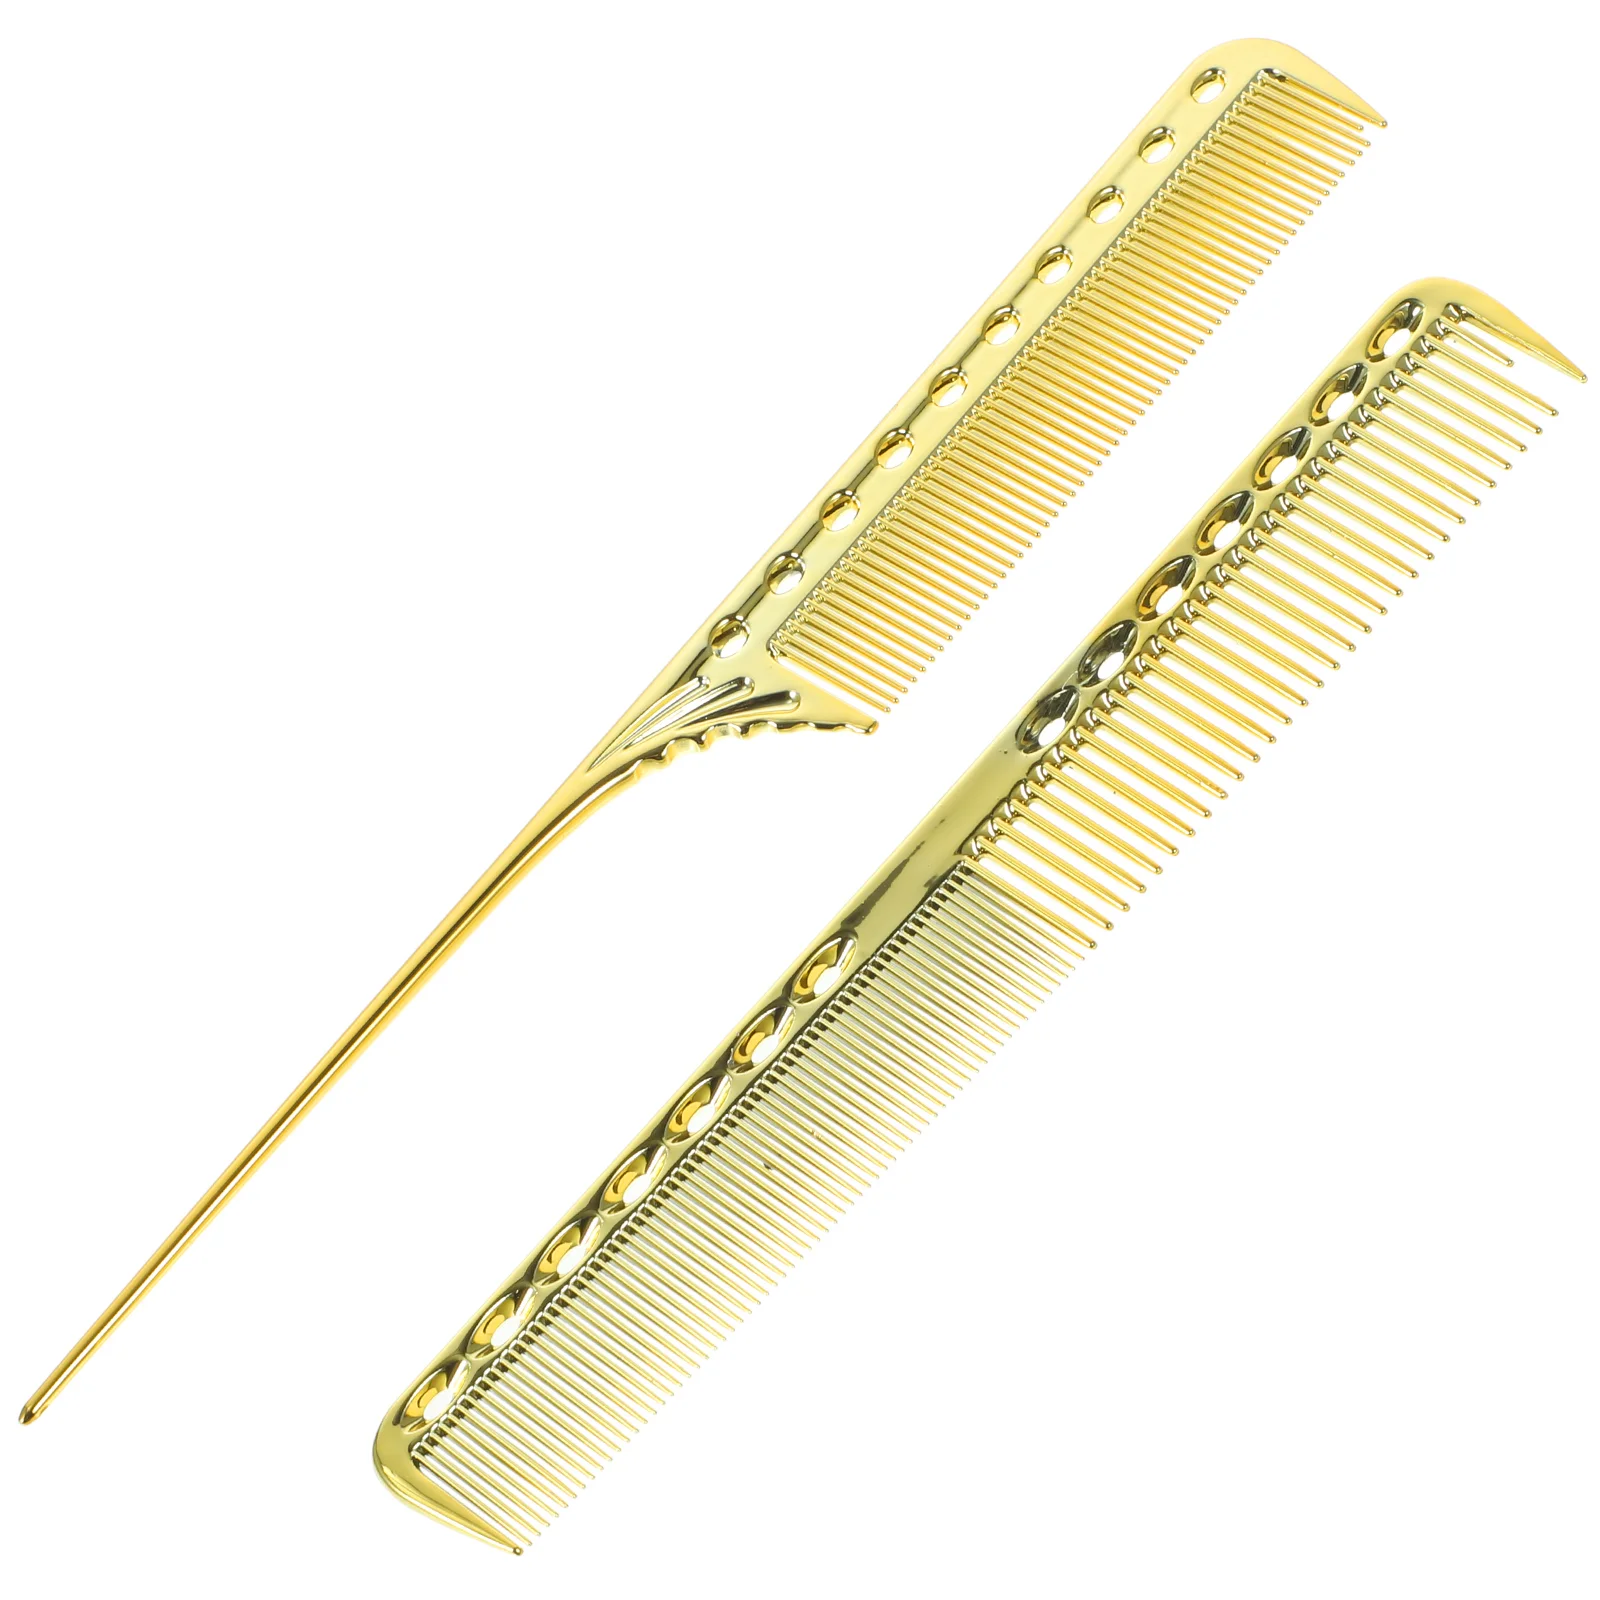 

Vintage Barber Comb for Hairdressing Salon Stylist Styling Men Cutting Barbershop Combs